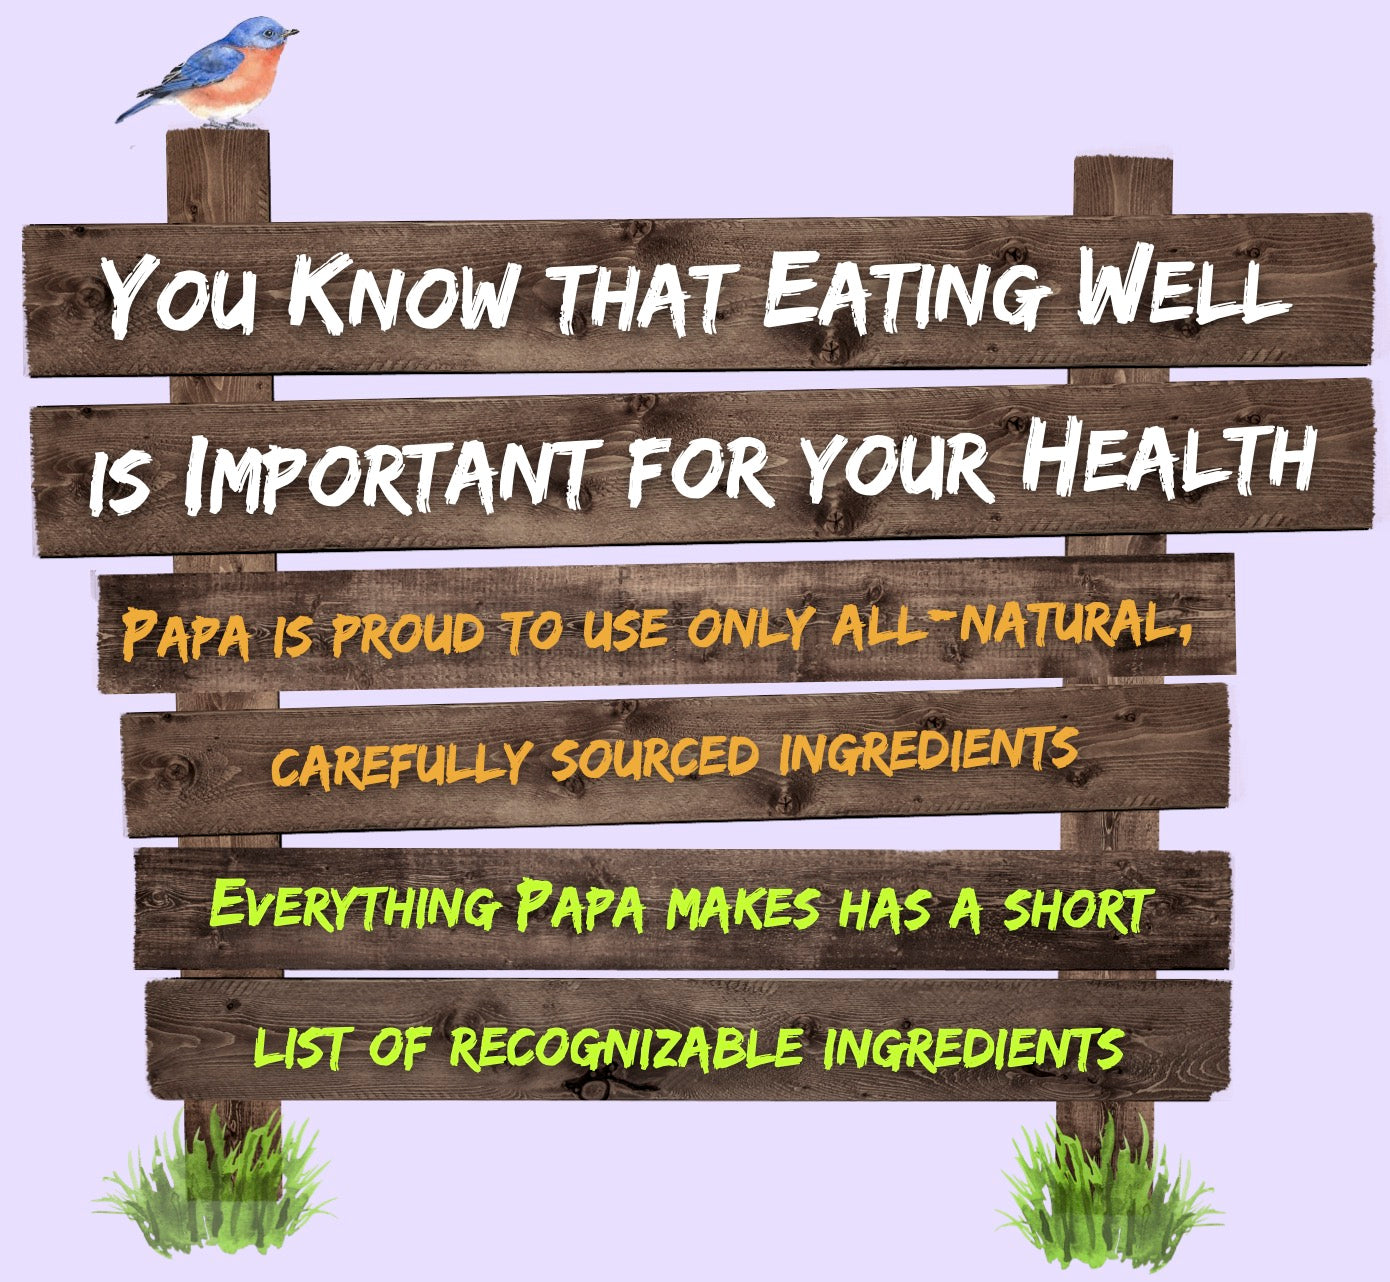 Sign that says "You Know that Nutrition is Important for you Health Papa is proud to use only all-natural, carefully sourced ingredients.  Everything Papa makes has a short list of recognizable ingredients."